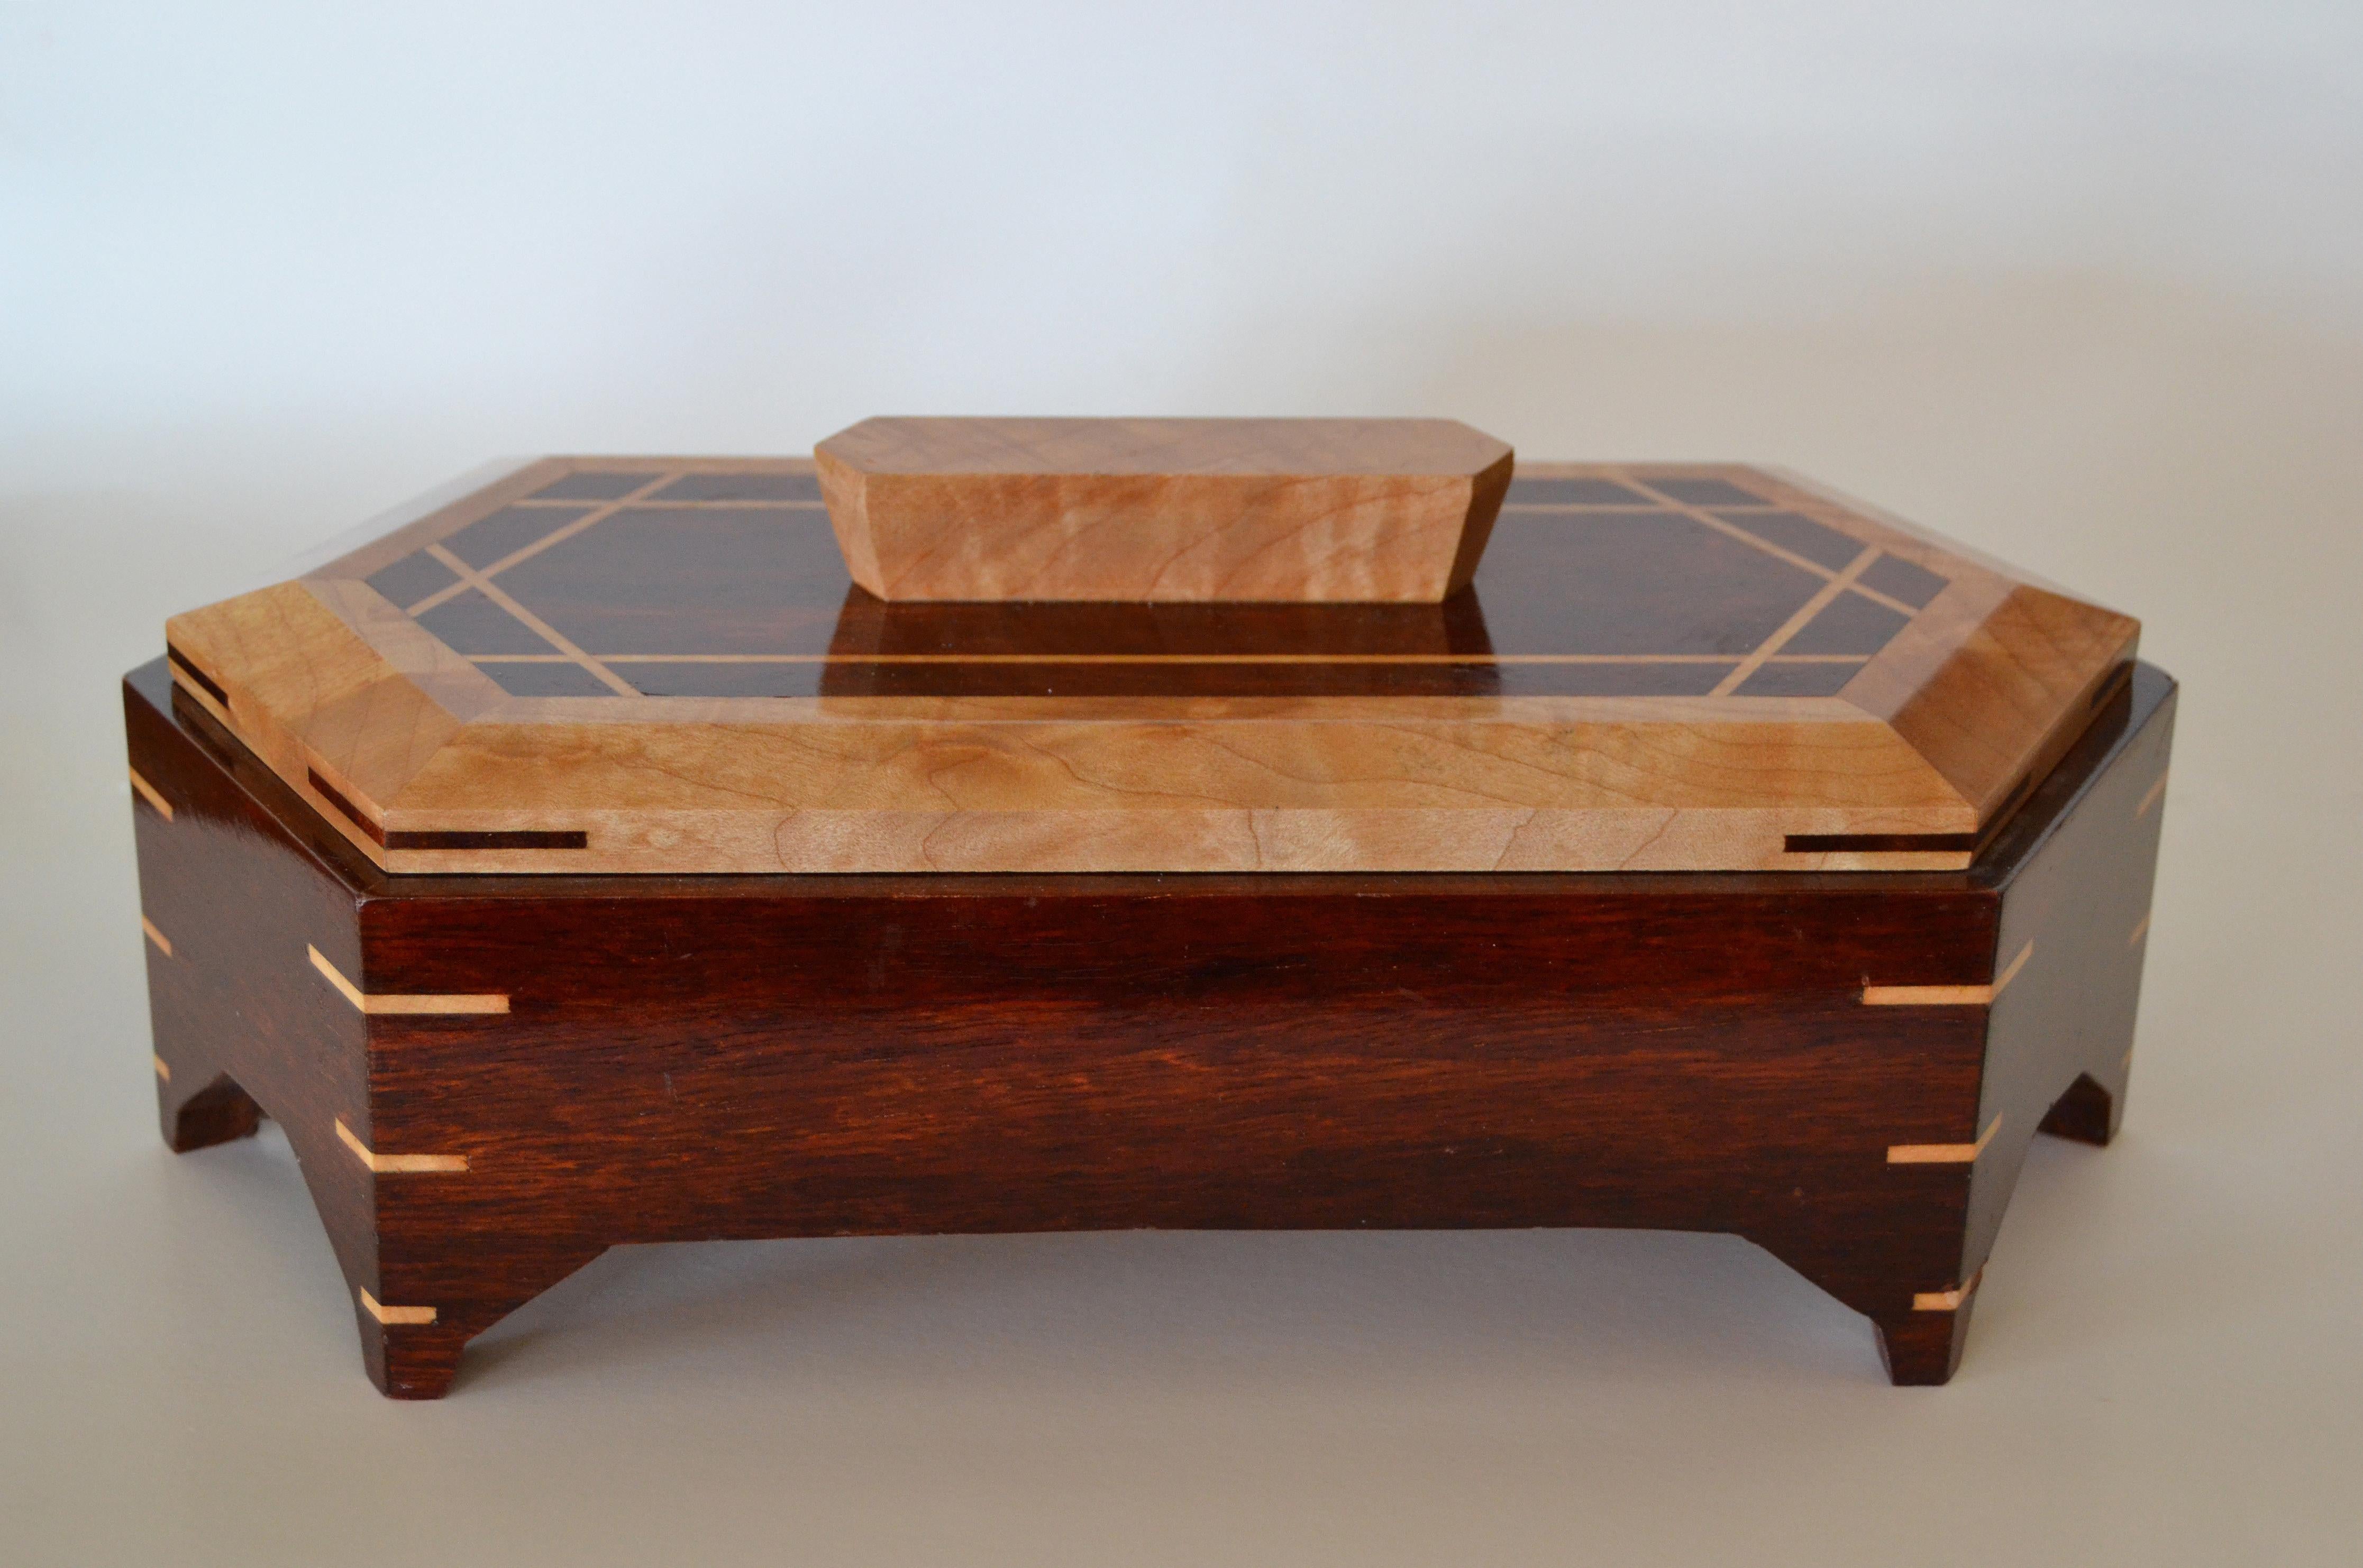 Mid-Century Modern two-tone handcrafted decorative mahogany wooden box with lid.
Look at the very many details in craftsmanship.
Great for jewelry or your keepsake pieces.